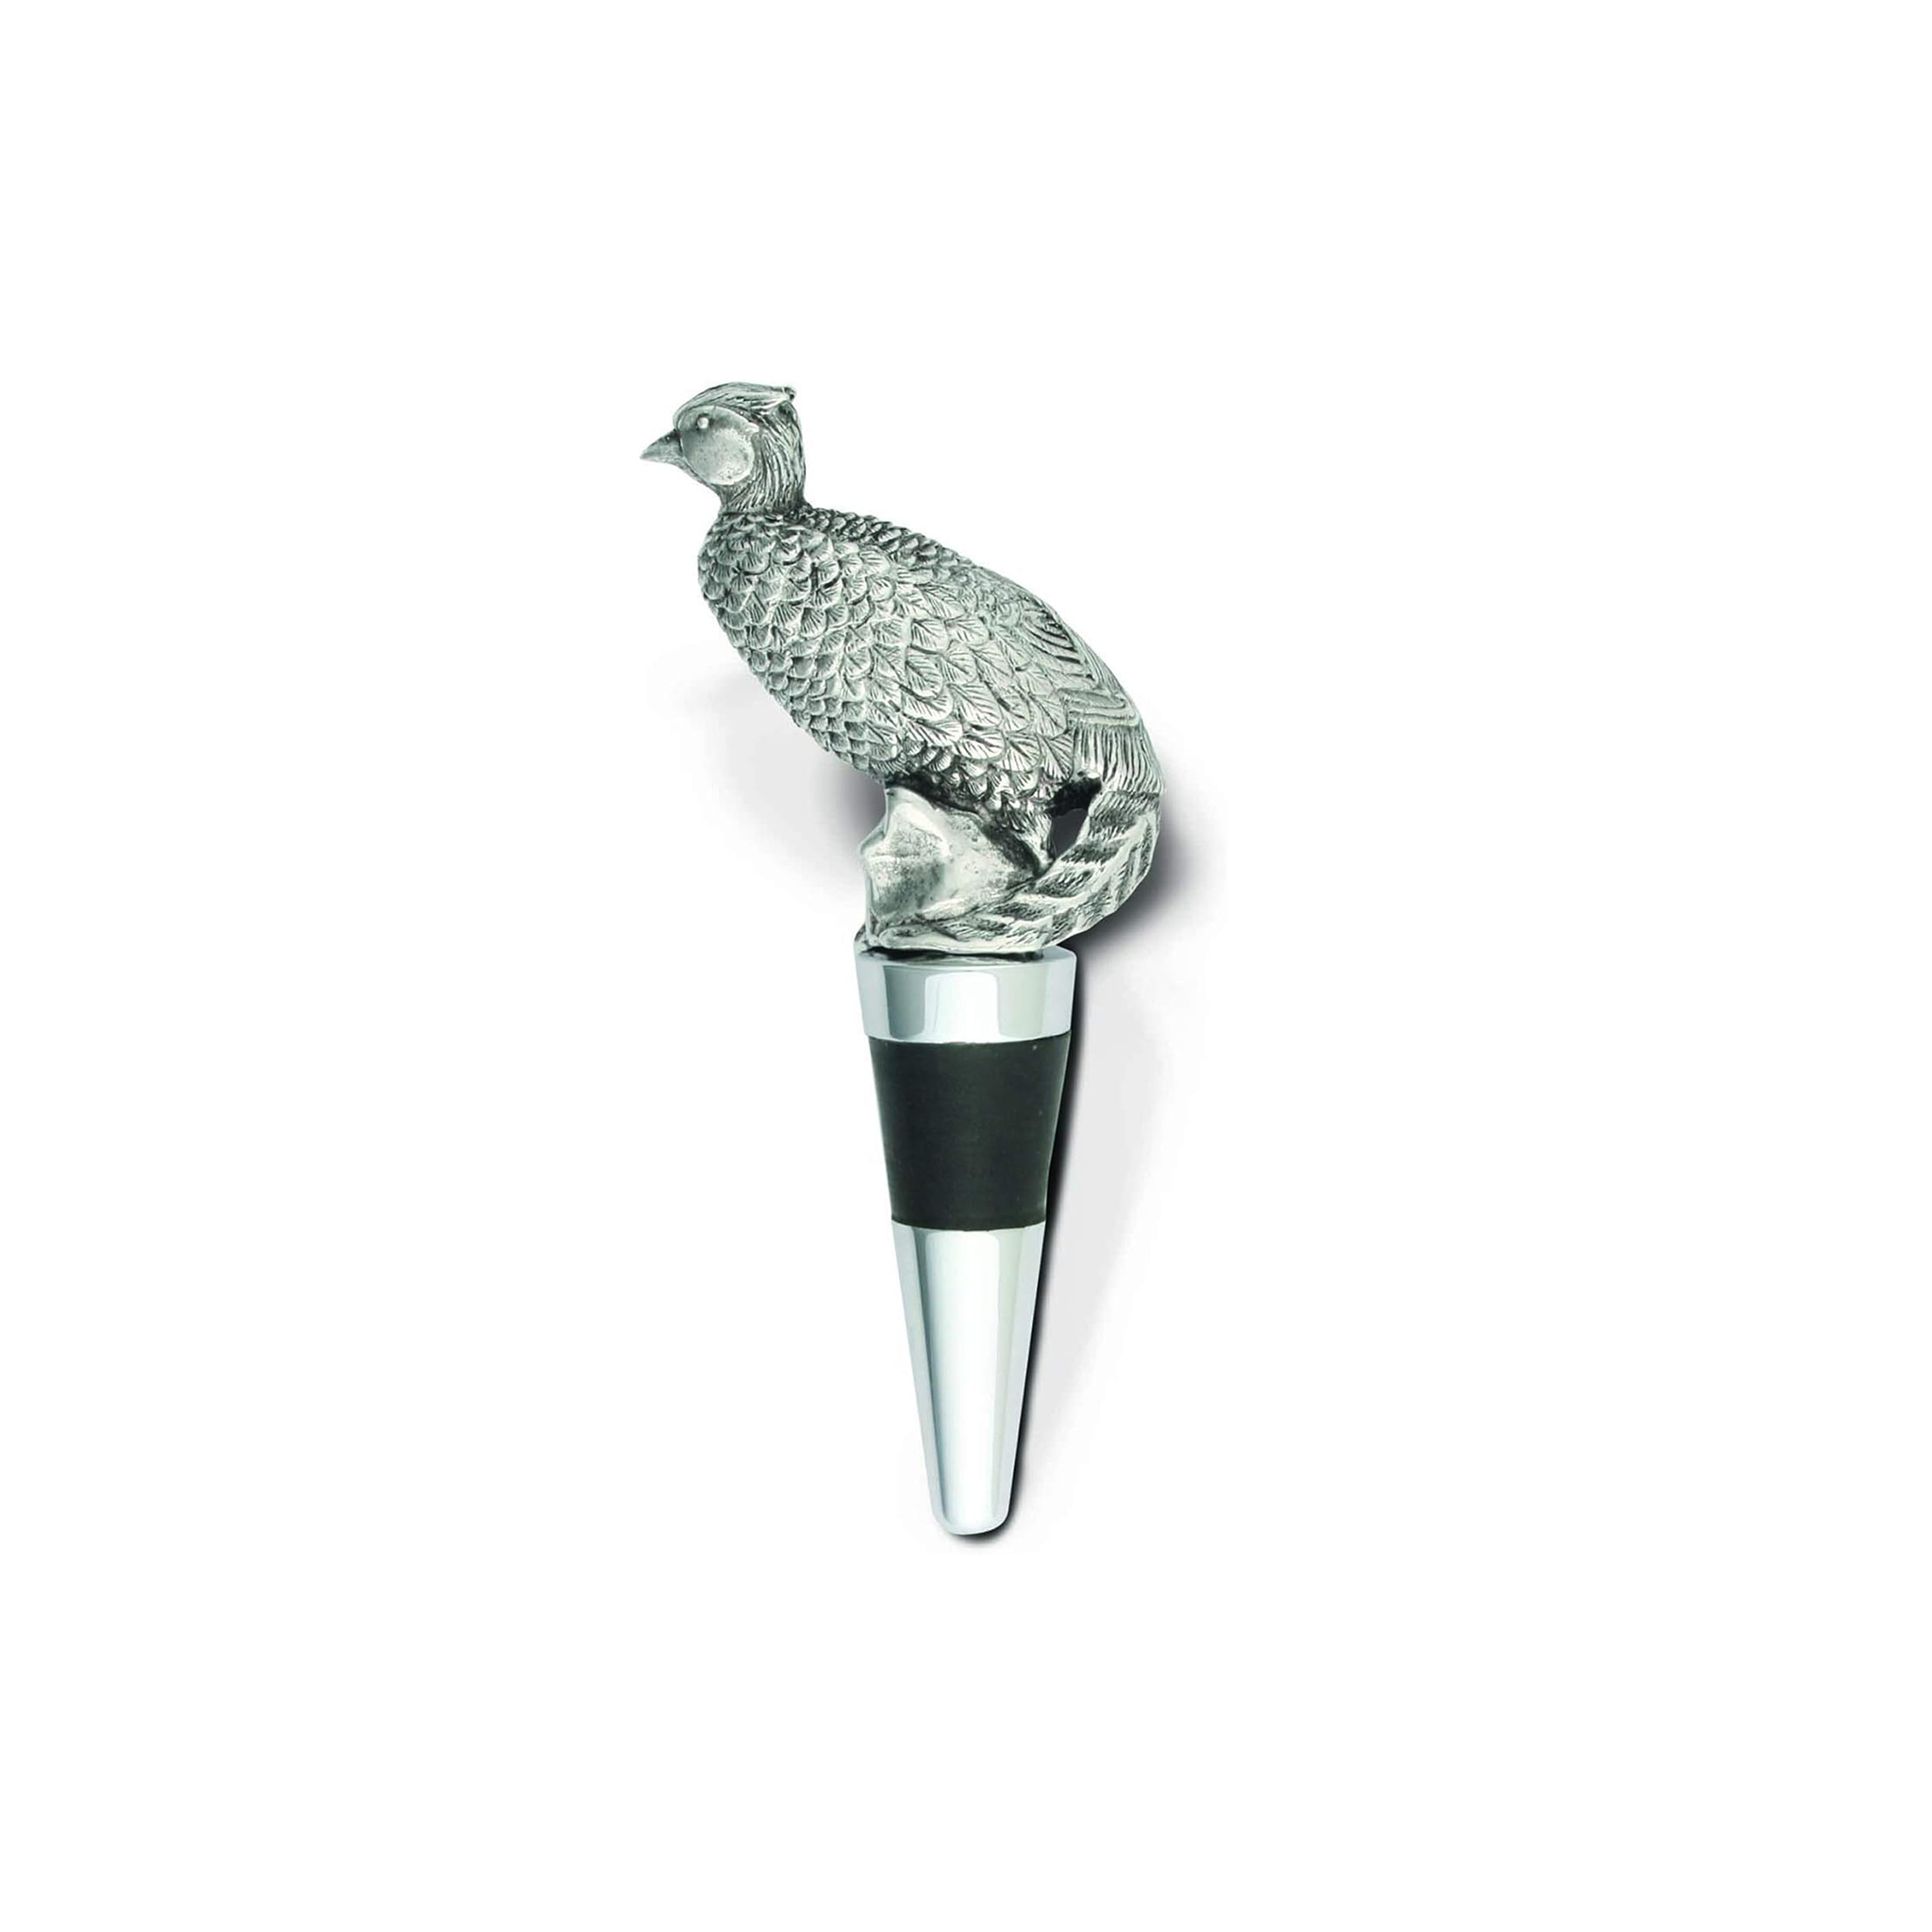 a wine bottle stopper with a detailed silver pheasant figurine atop it. The pheasant is intricately textured to show feathers, and it sits on a tapering stopper with black rubber gasket and silver band, suggesting a sleek and elegant design